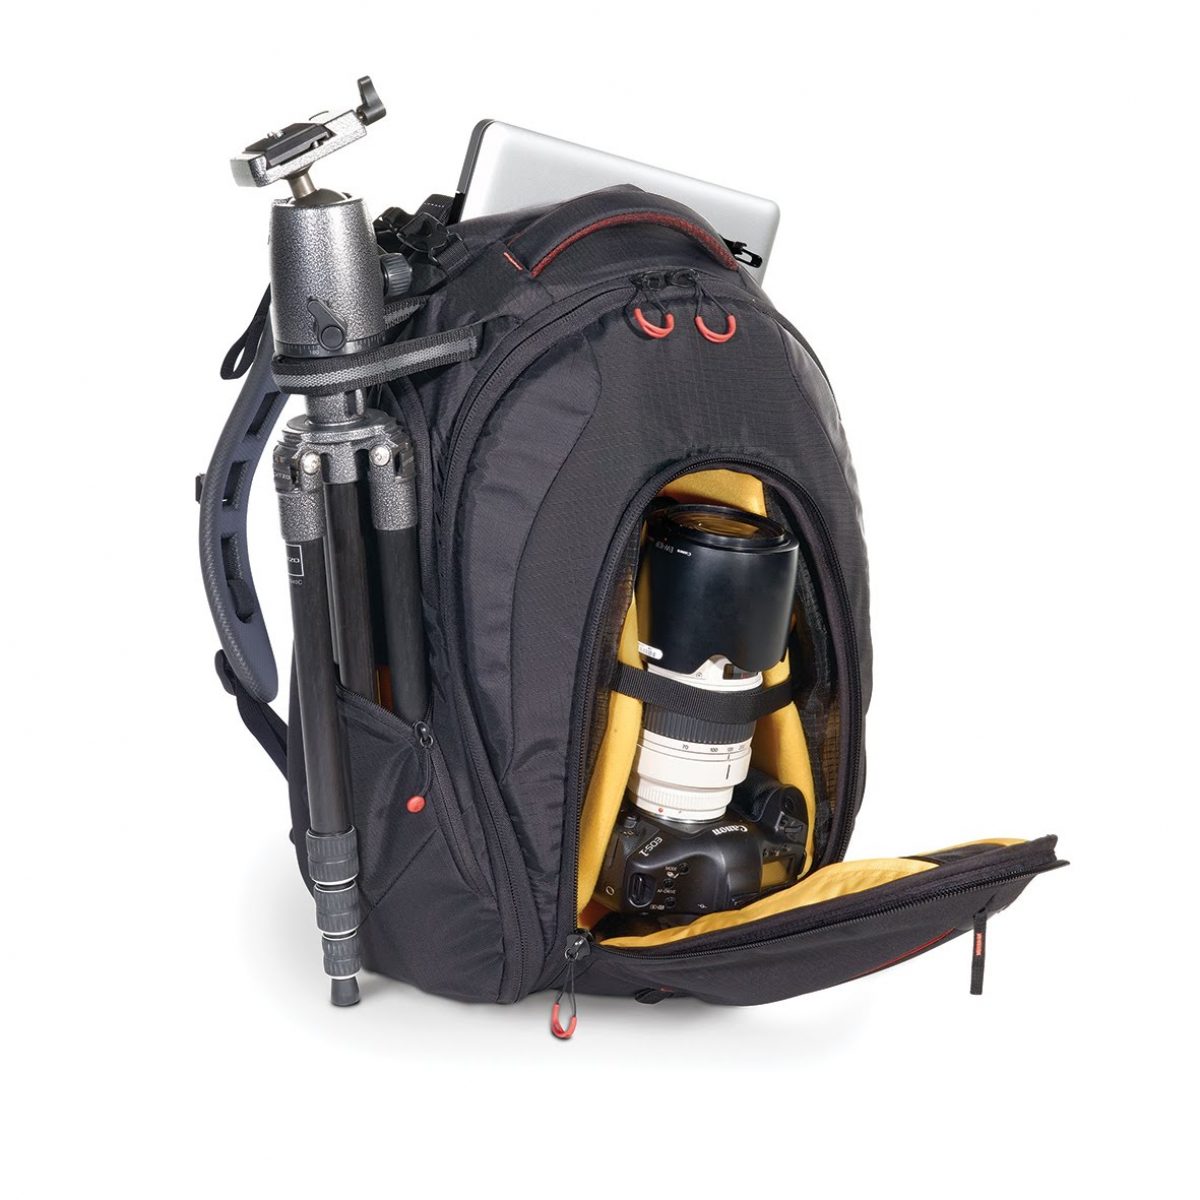 Podcast 245: Kata Bag 3N1-33 Sling Backpack Review | Martin Bailey  Photography